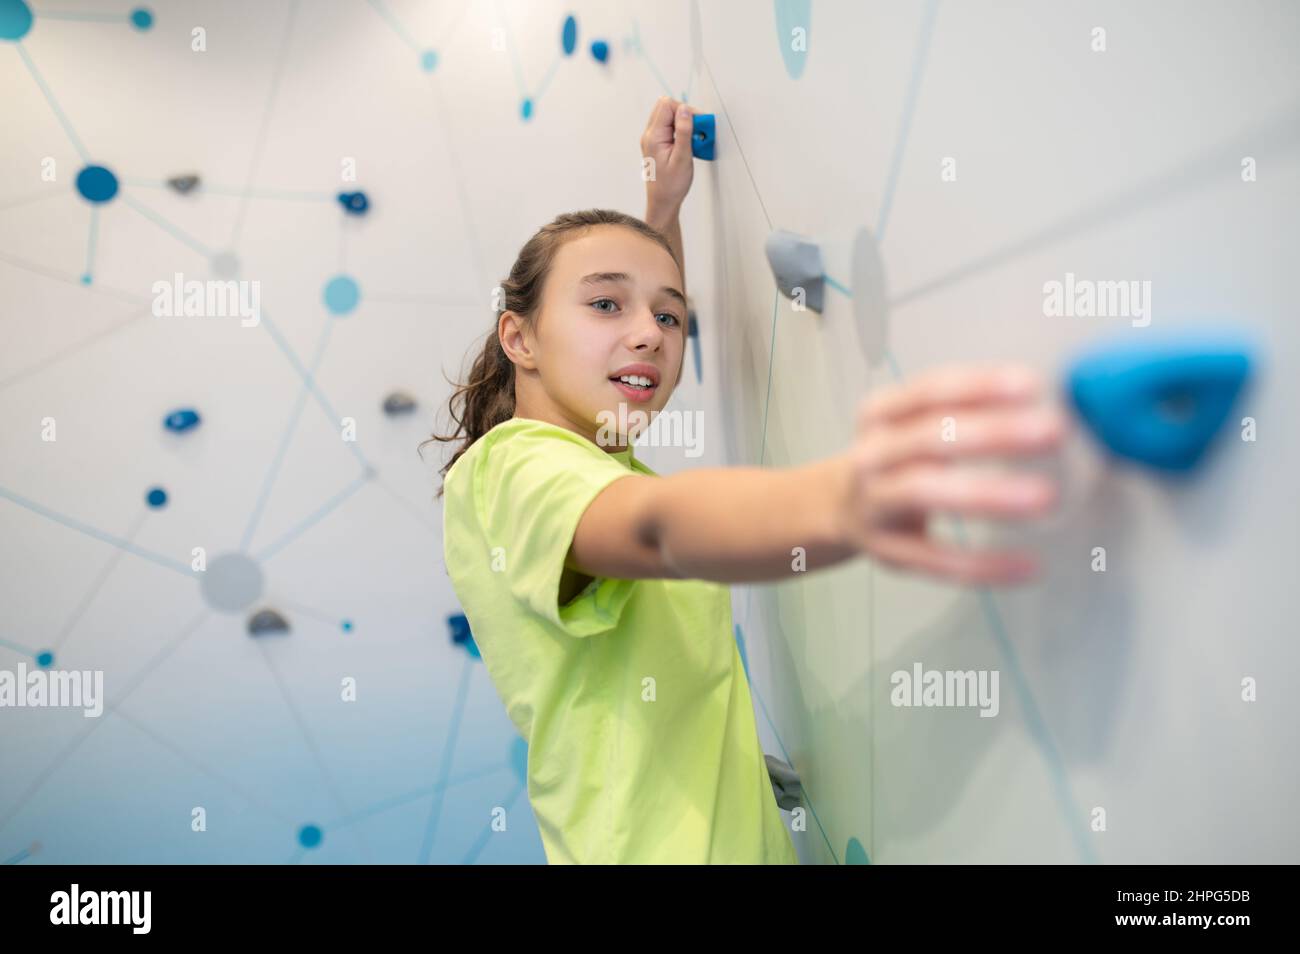 Girl on wall with effort stretching hand to ledge Stock Photo